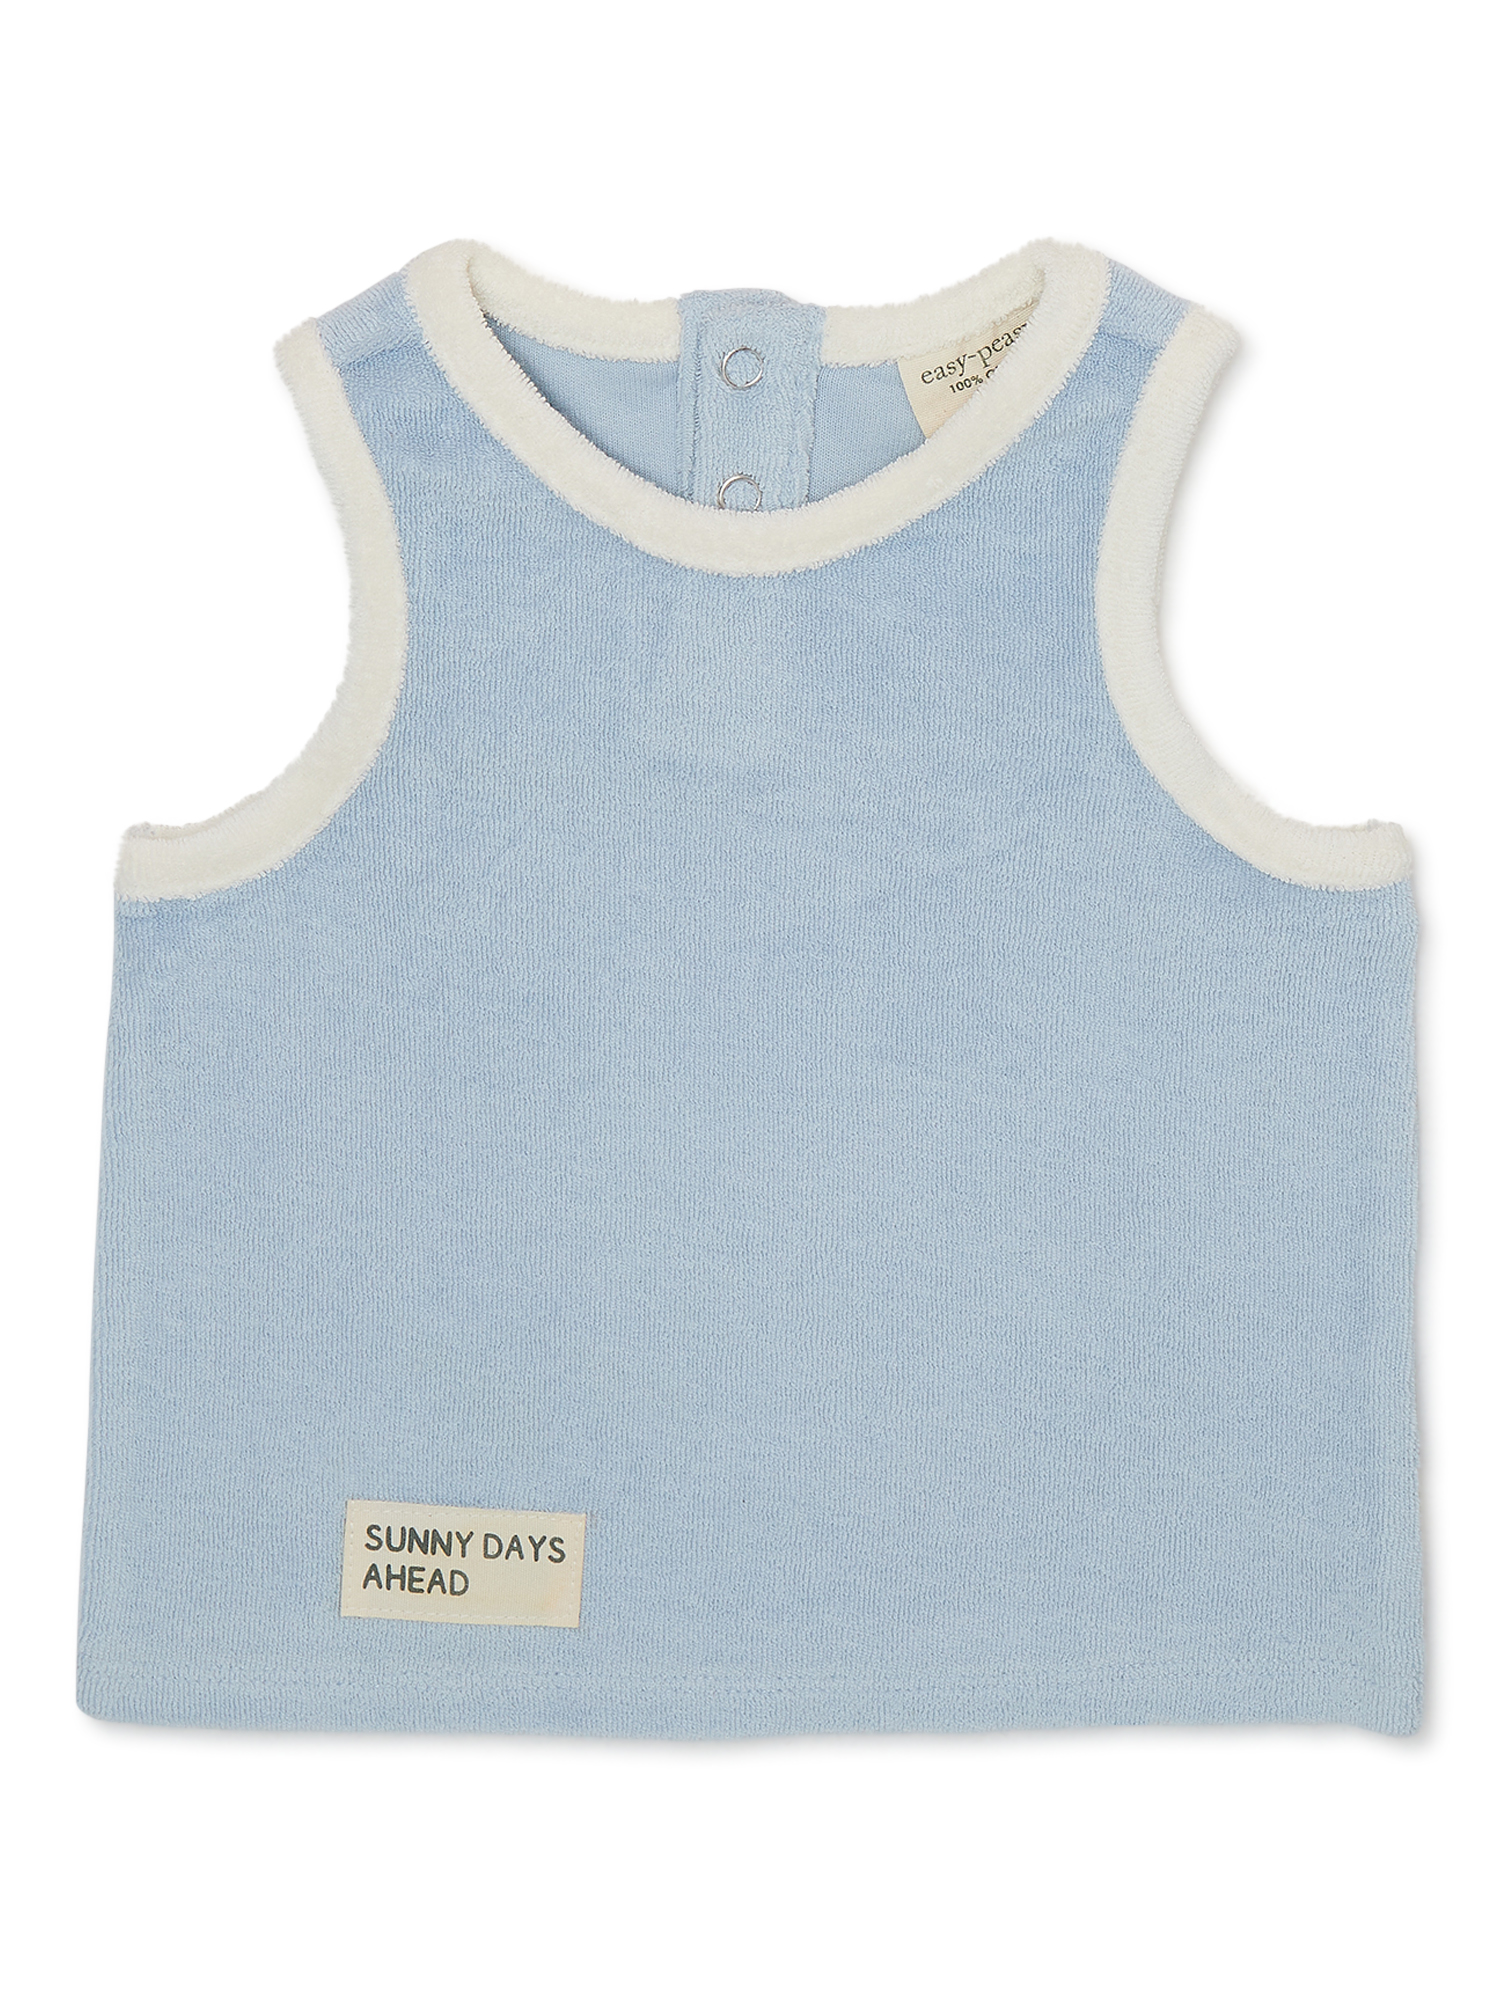 easy-peasy Baby Solid Tank Top, Sizes 0-24 Months - image 1 of 4